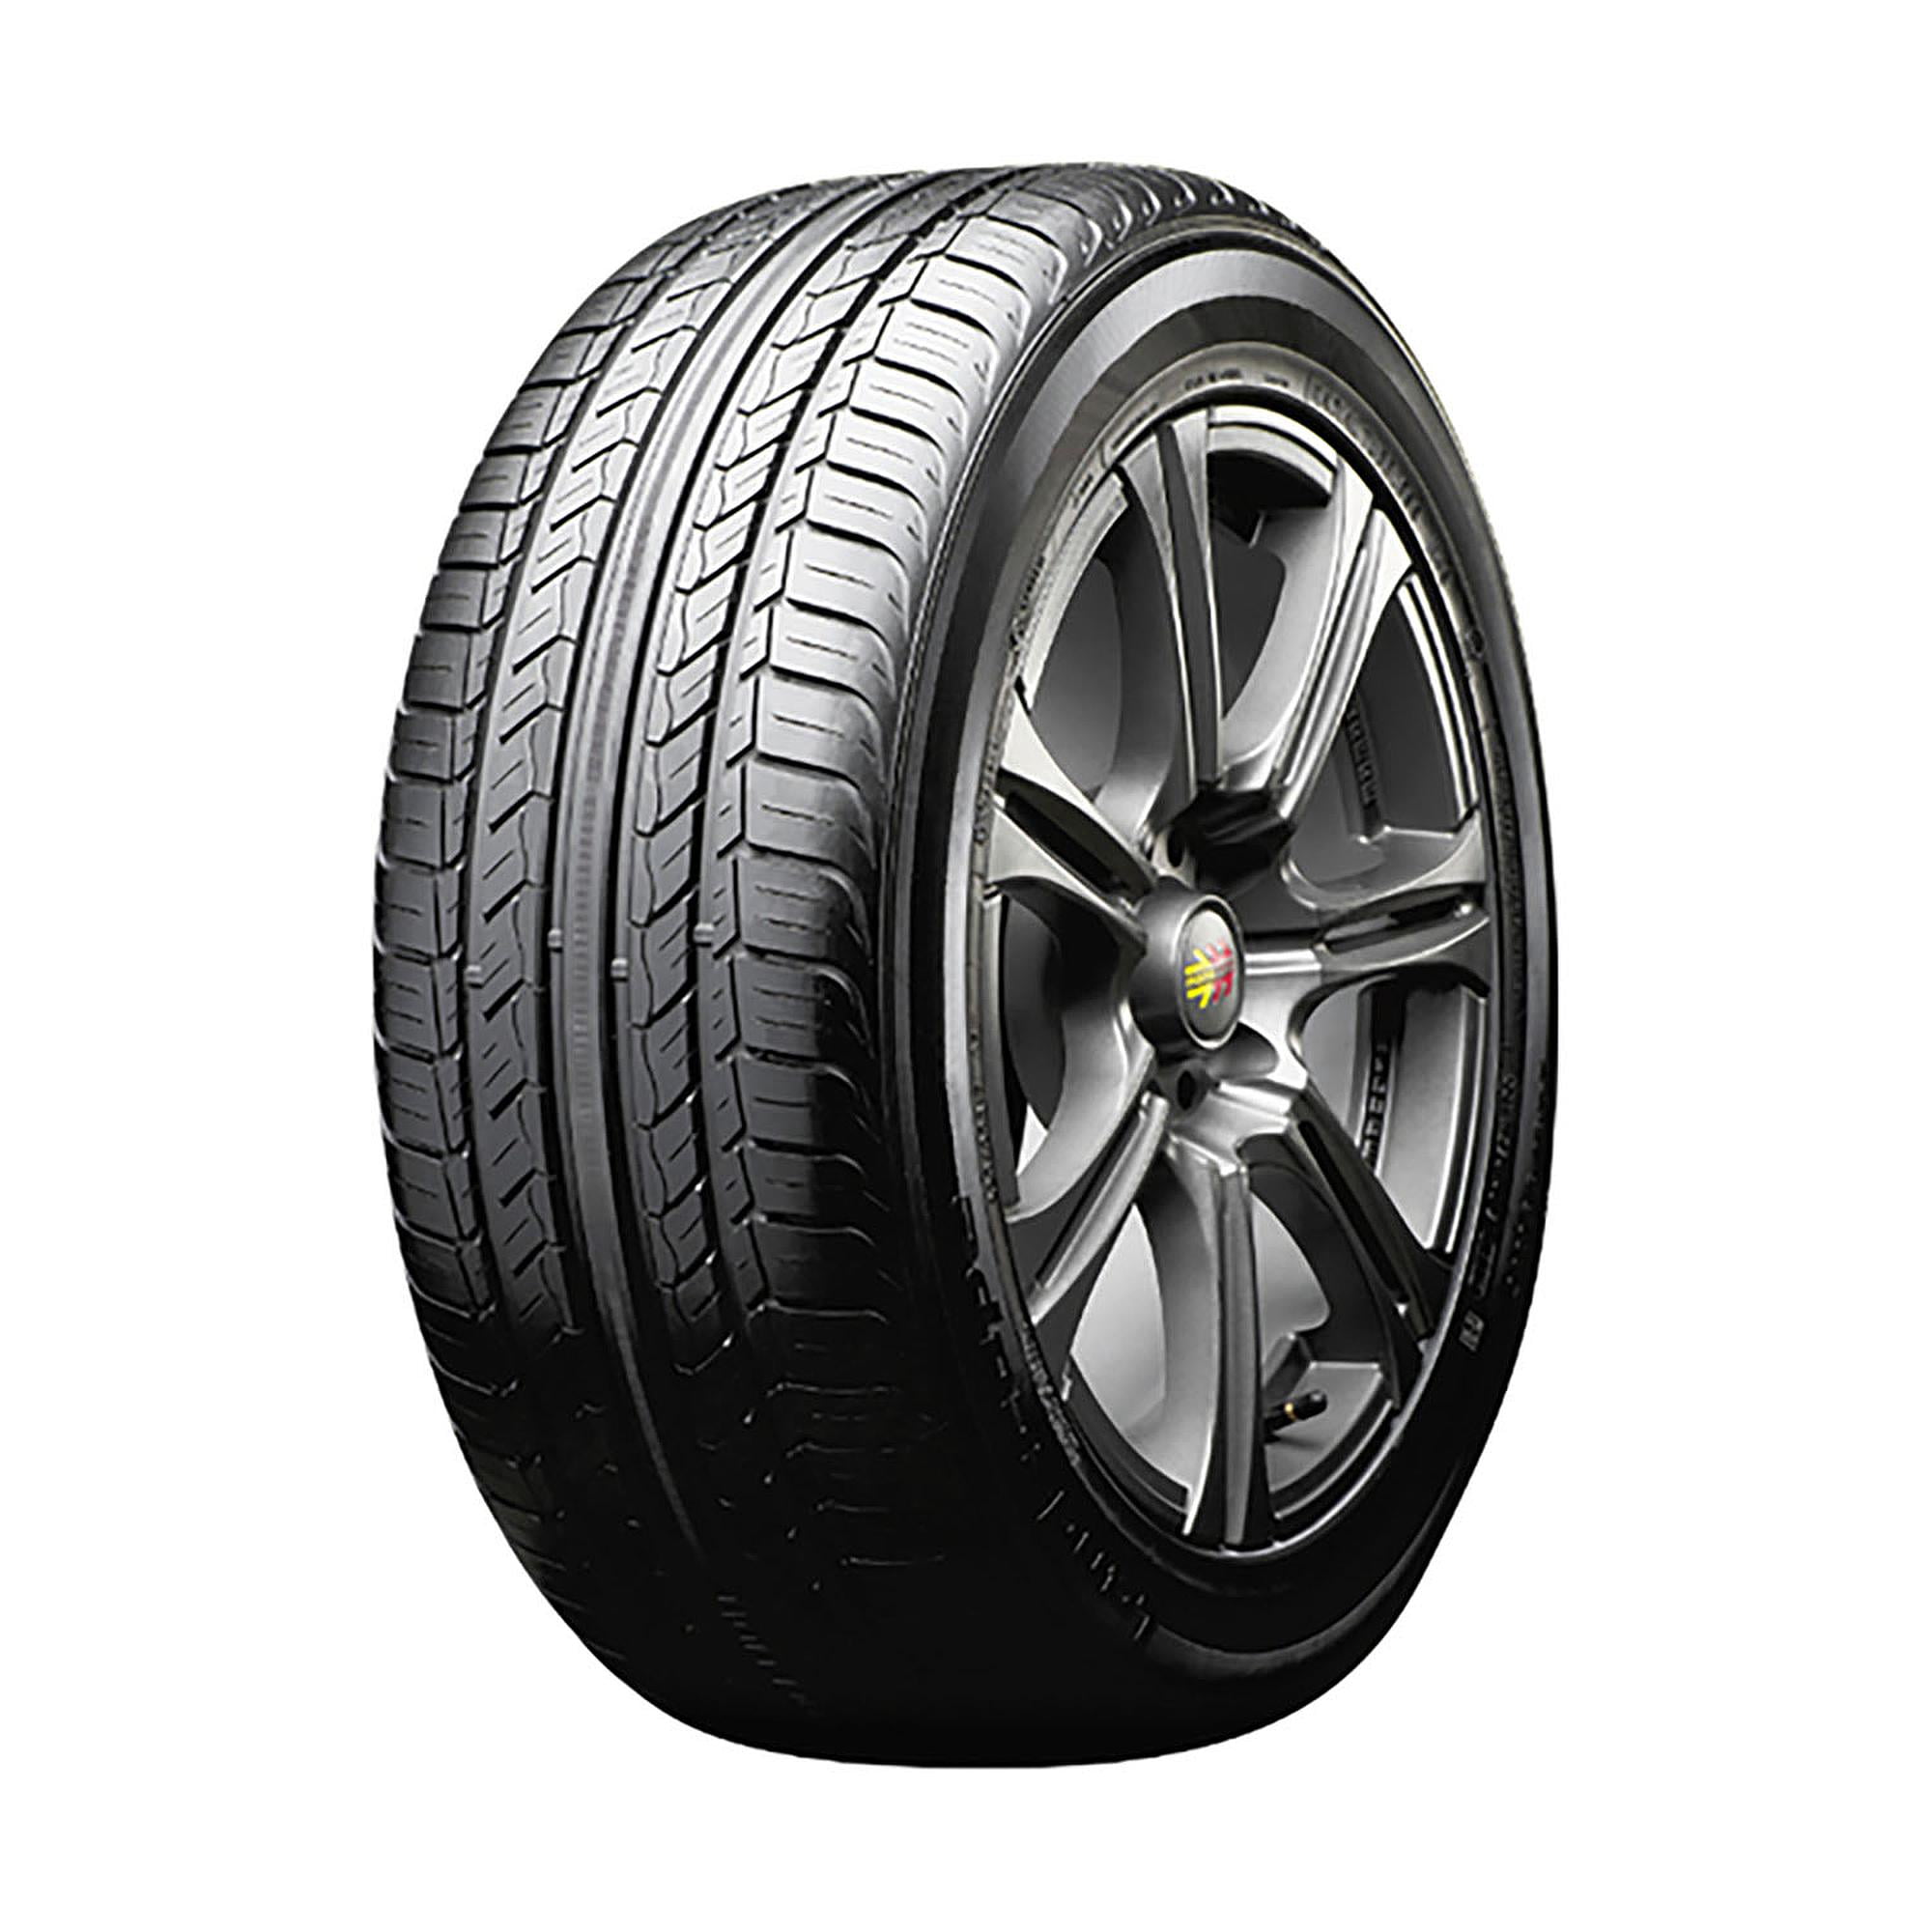 205/50R17 Continental Tire BSW ContiProContact All Season 89V